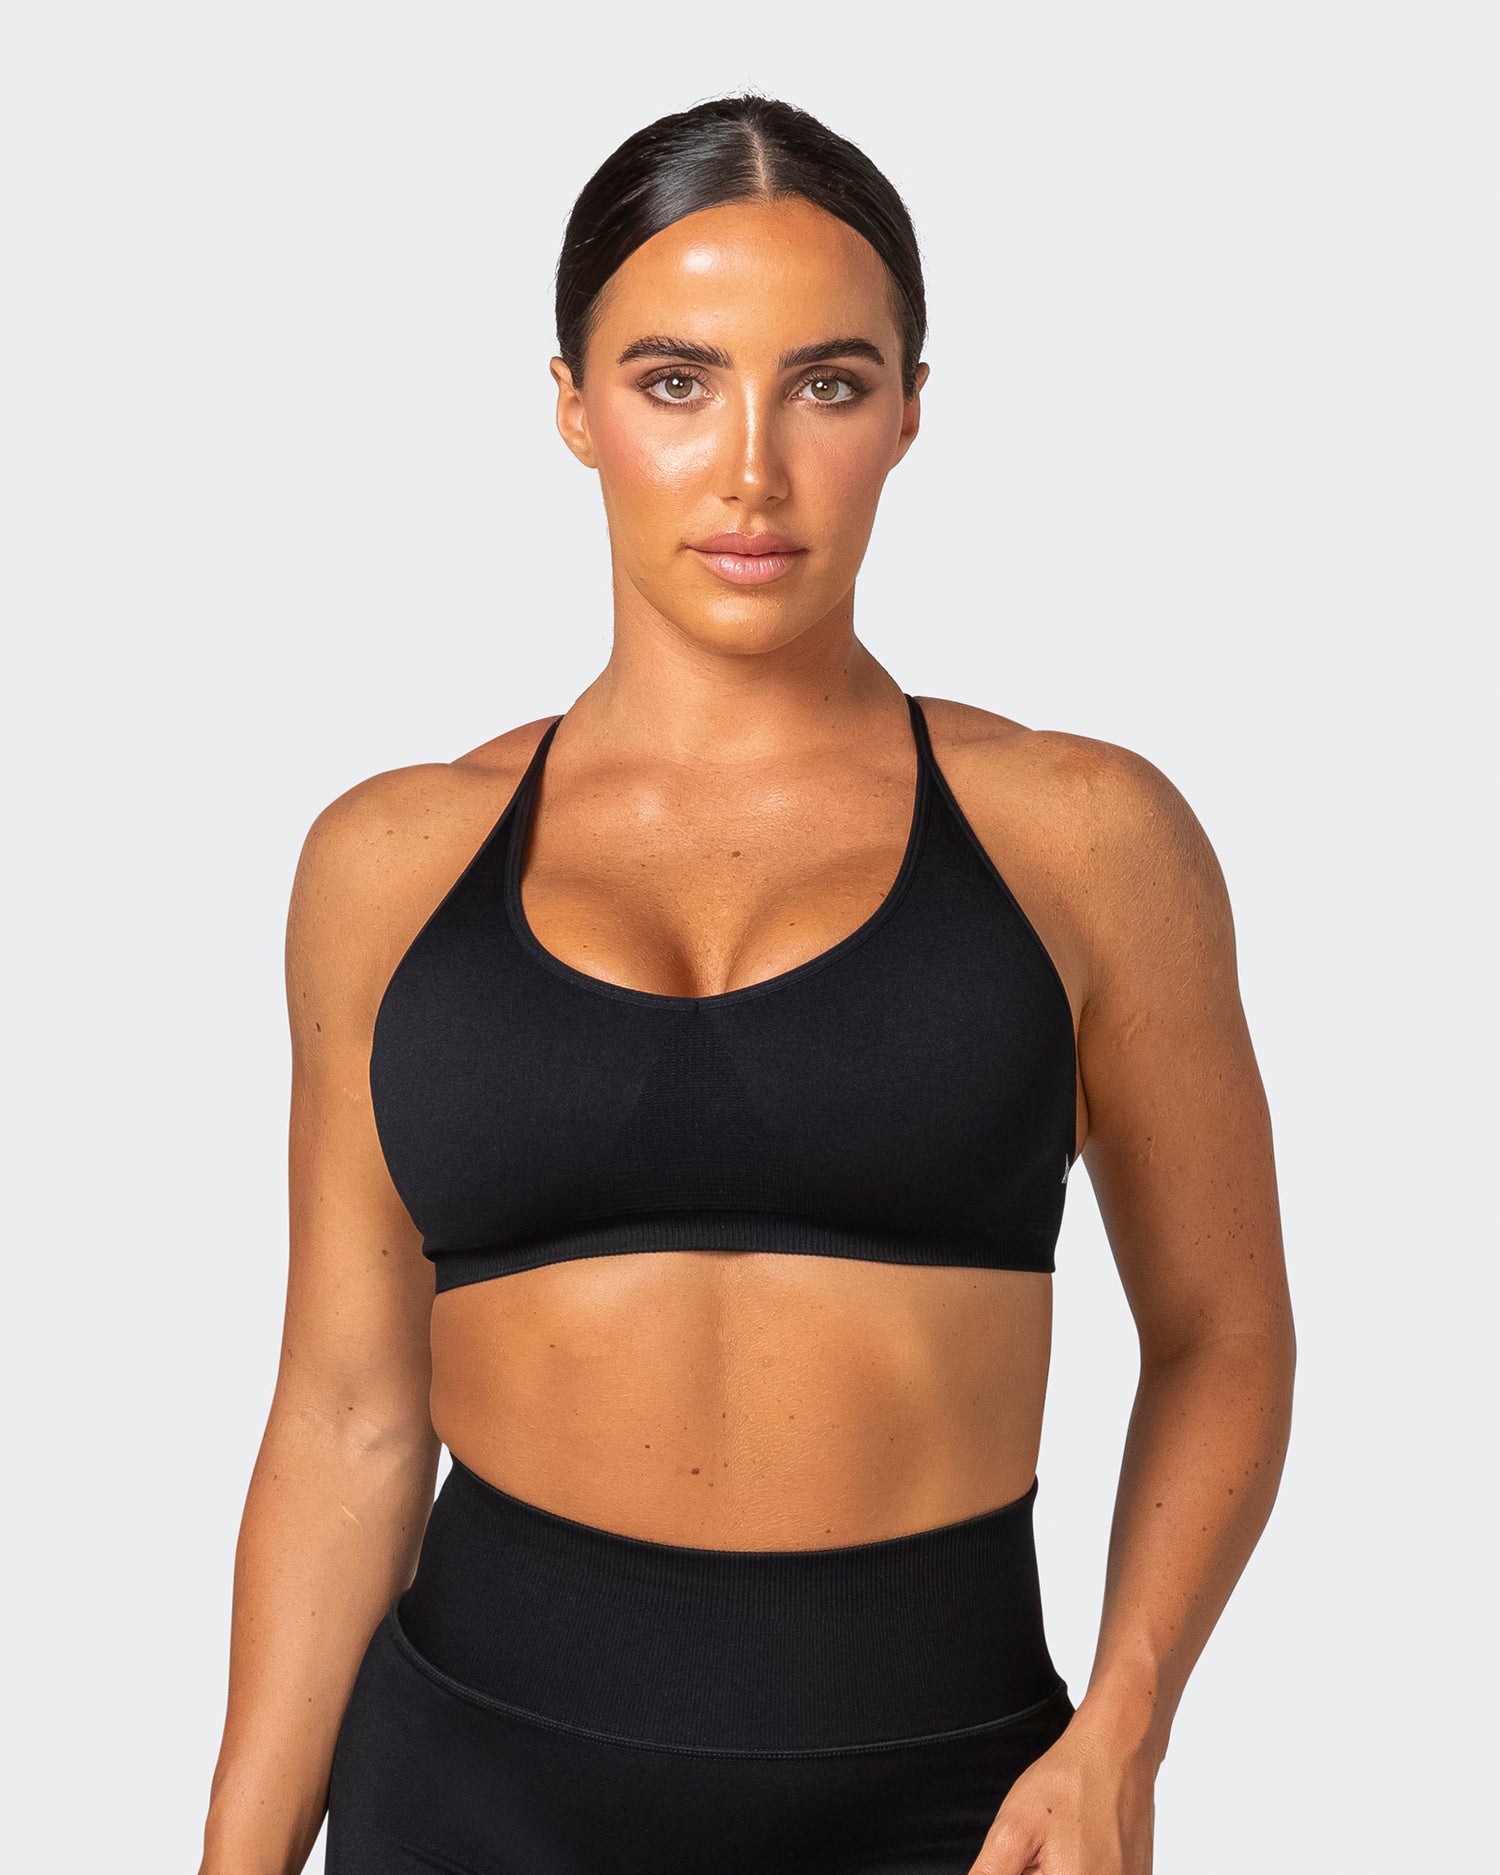 Definition Seamless Bra - Black - Muscle Nation